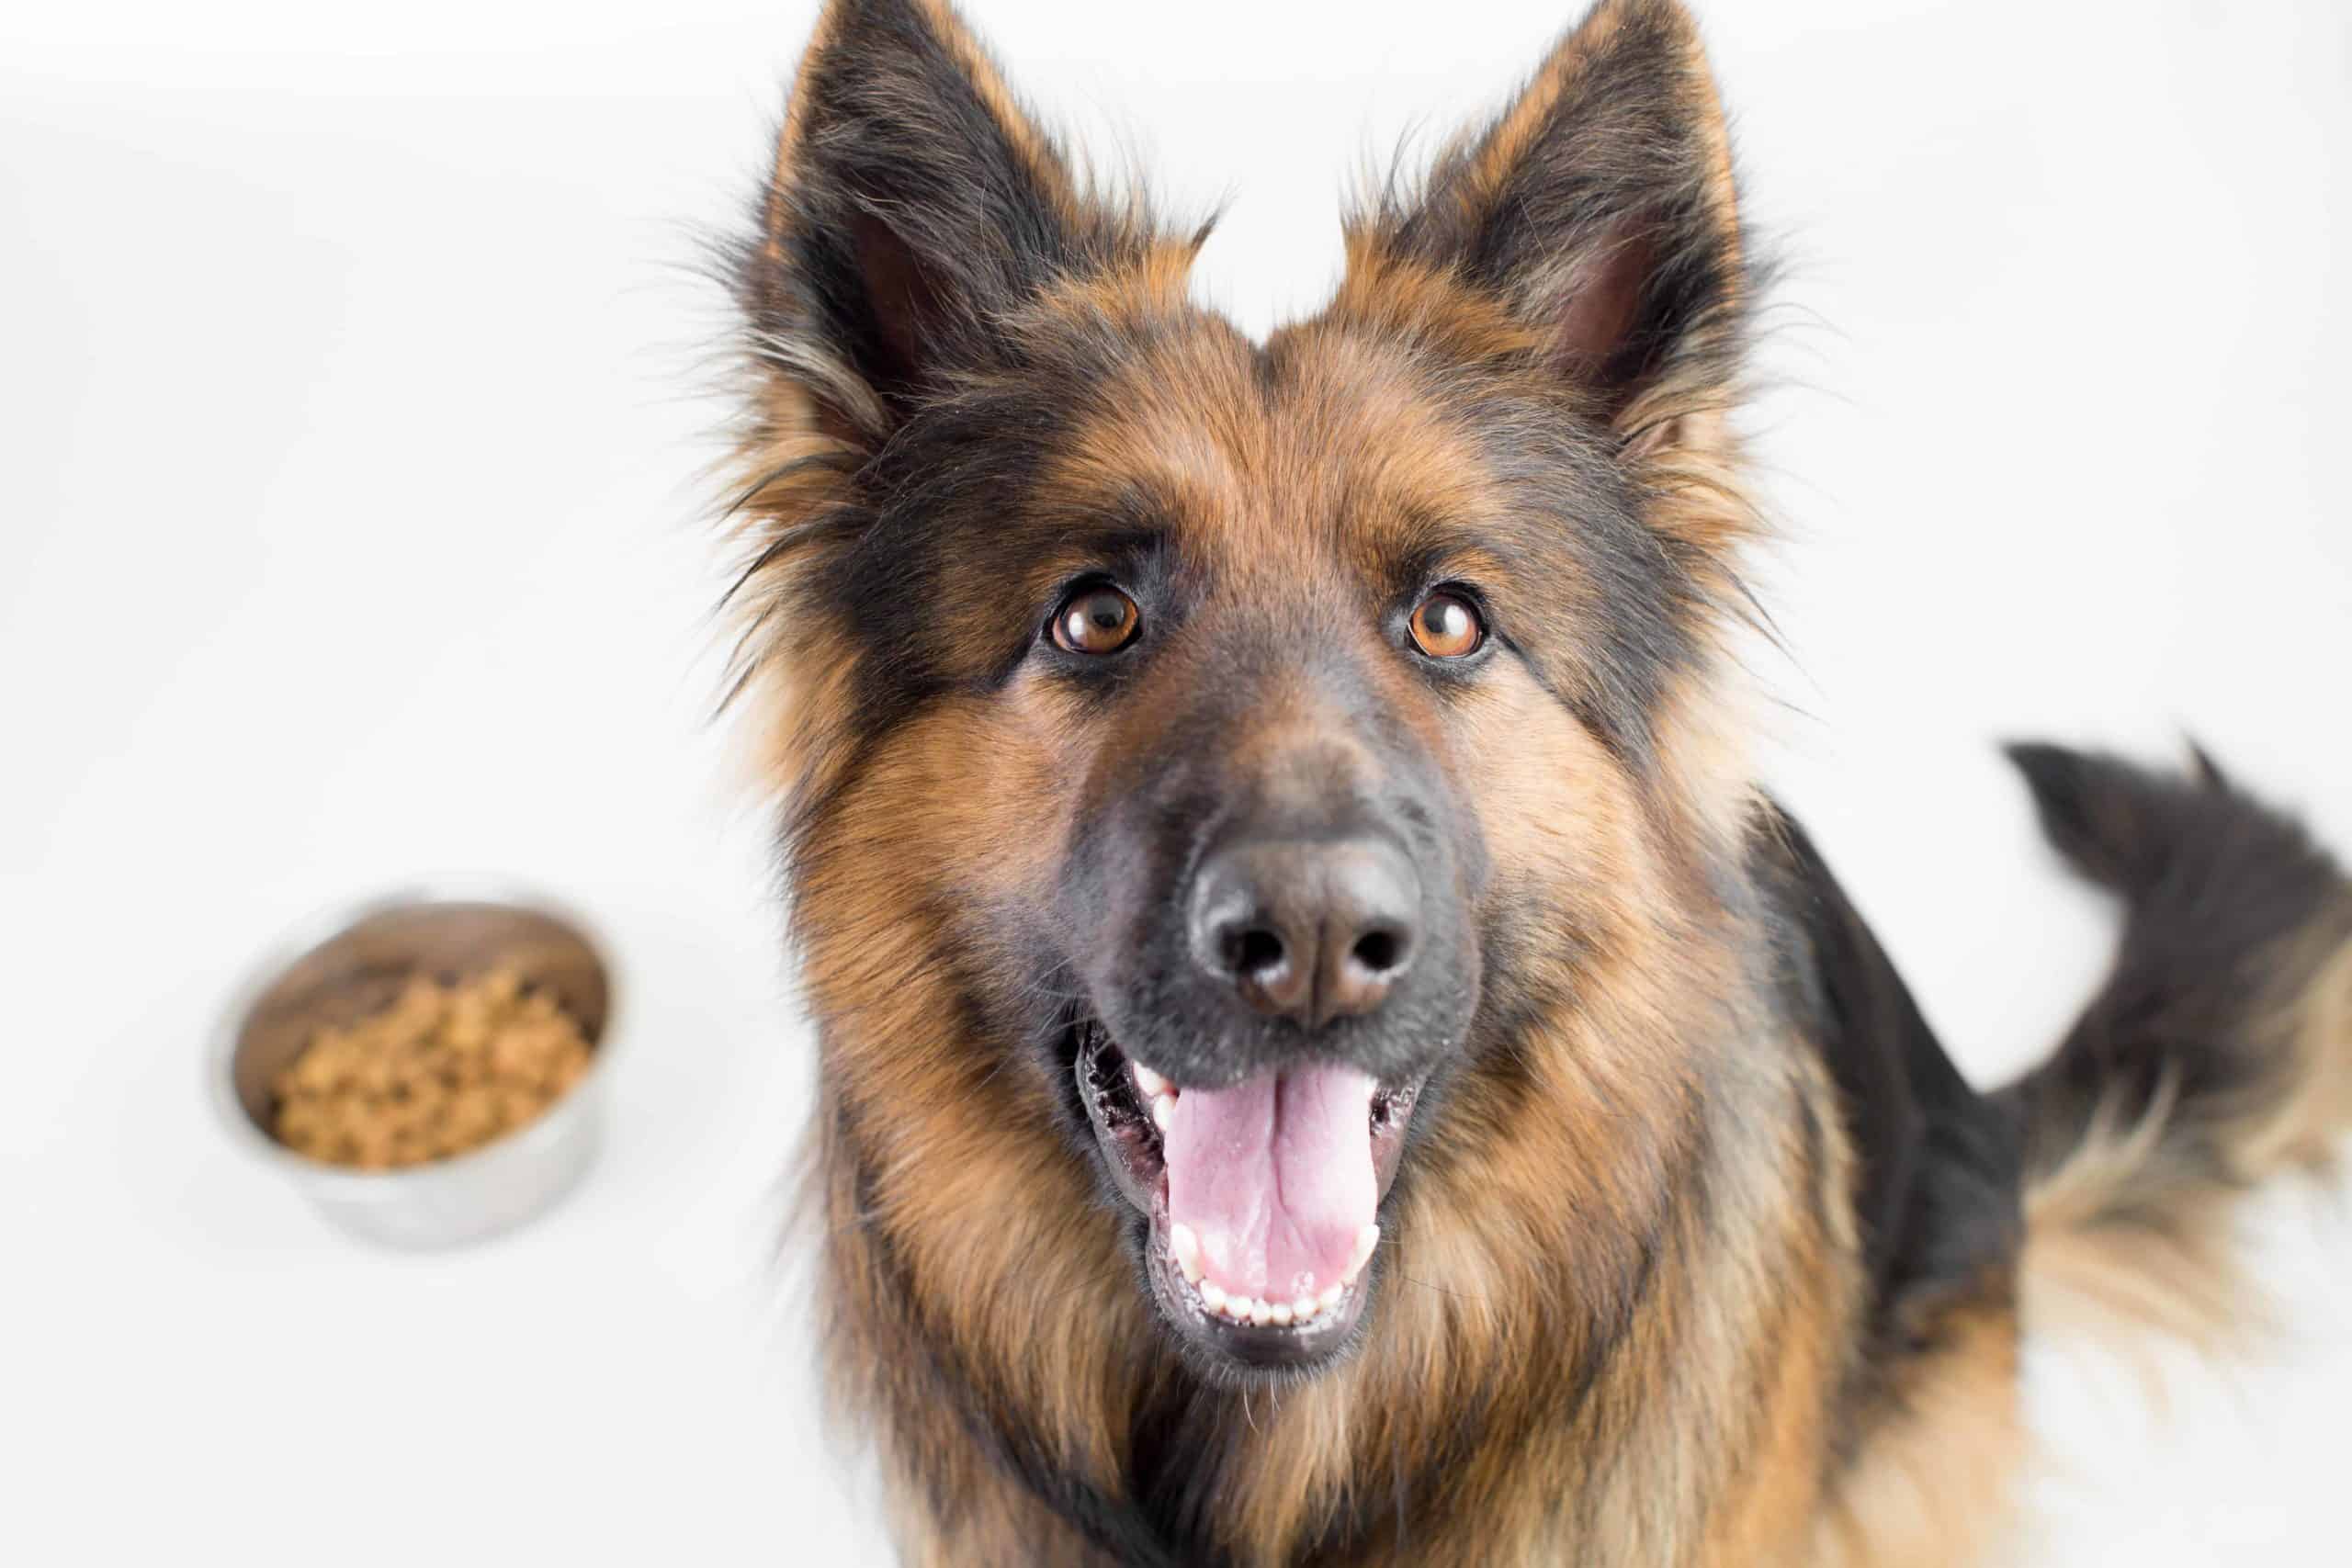 Happy German shepherd with a bowl of dog food. Study and implement these ten essential German shepherd diet tips to ensure you provide healthy nutrition for your dog.